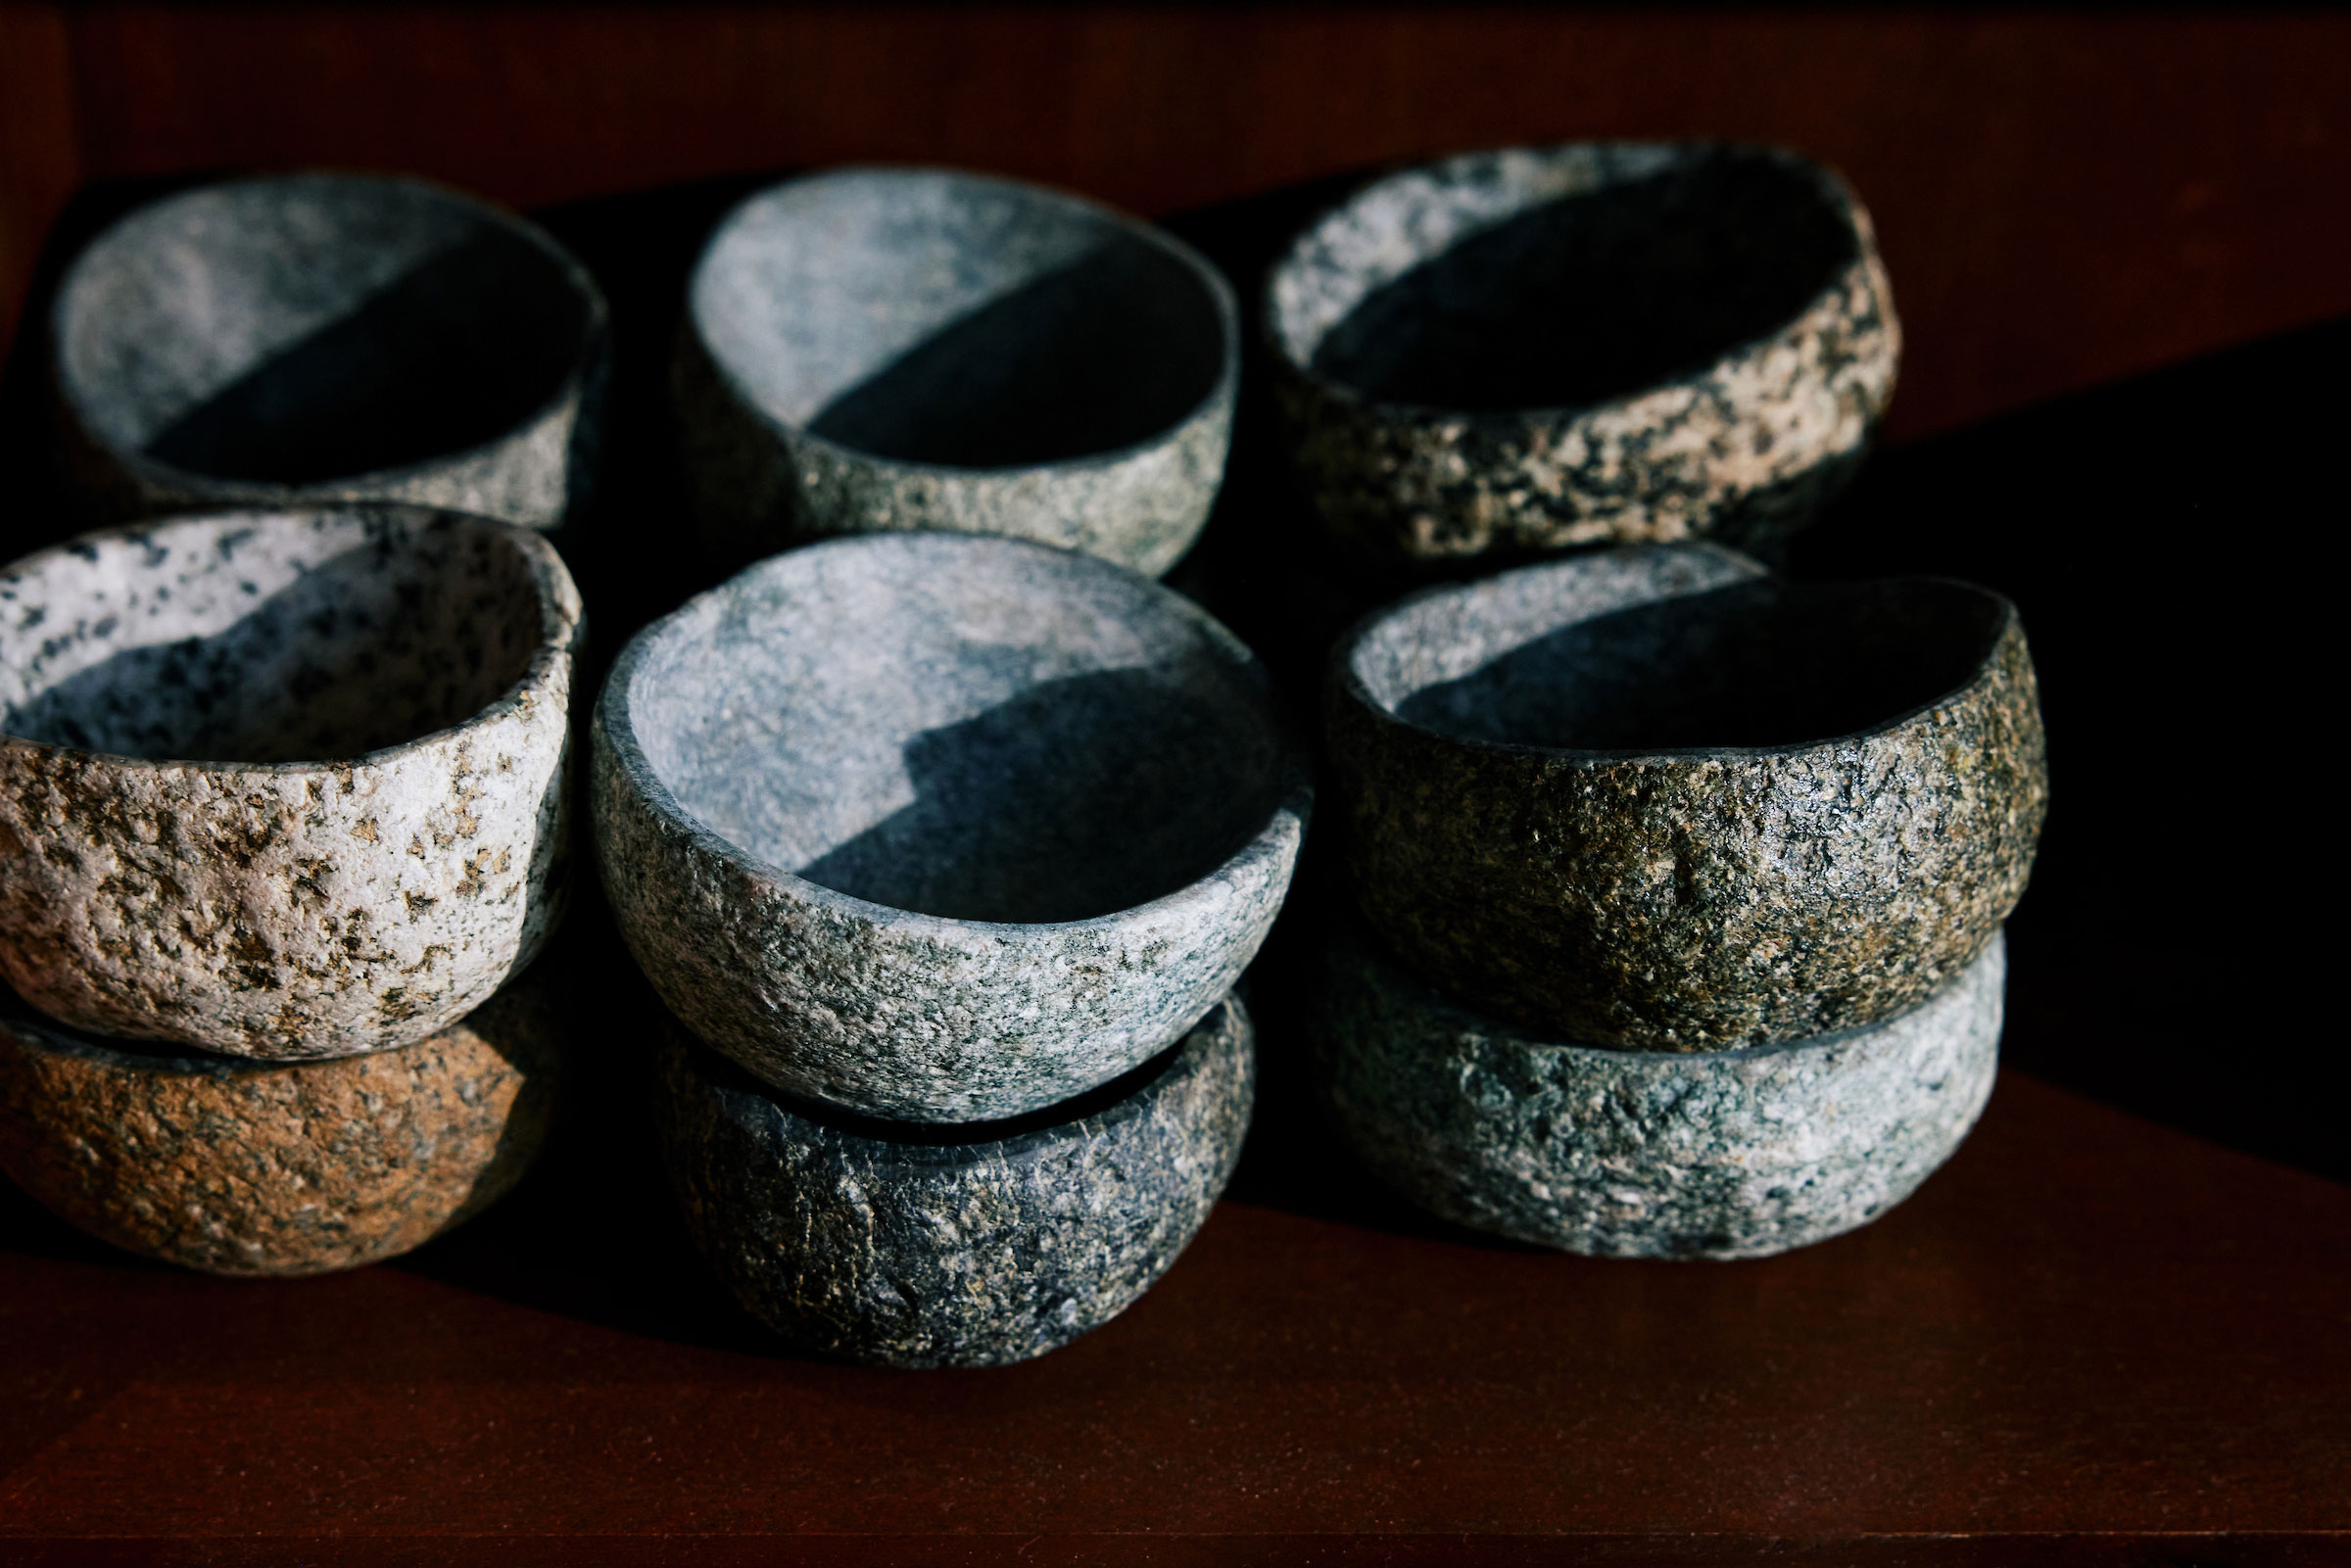 stacks of rustic stone bowls arranged in a row